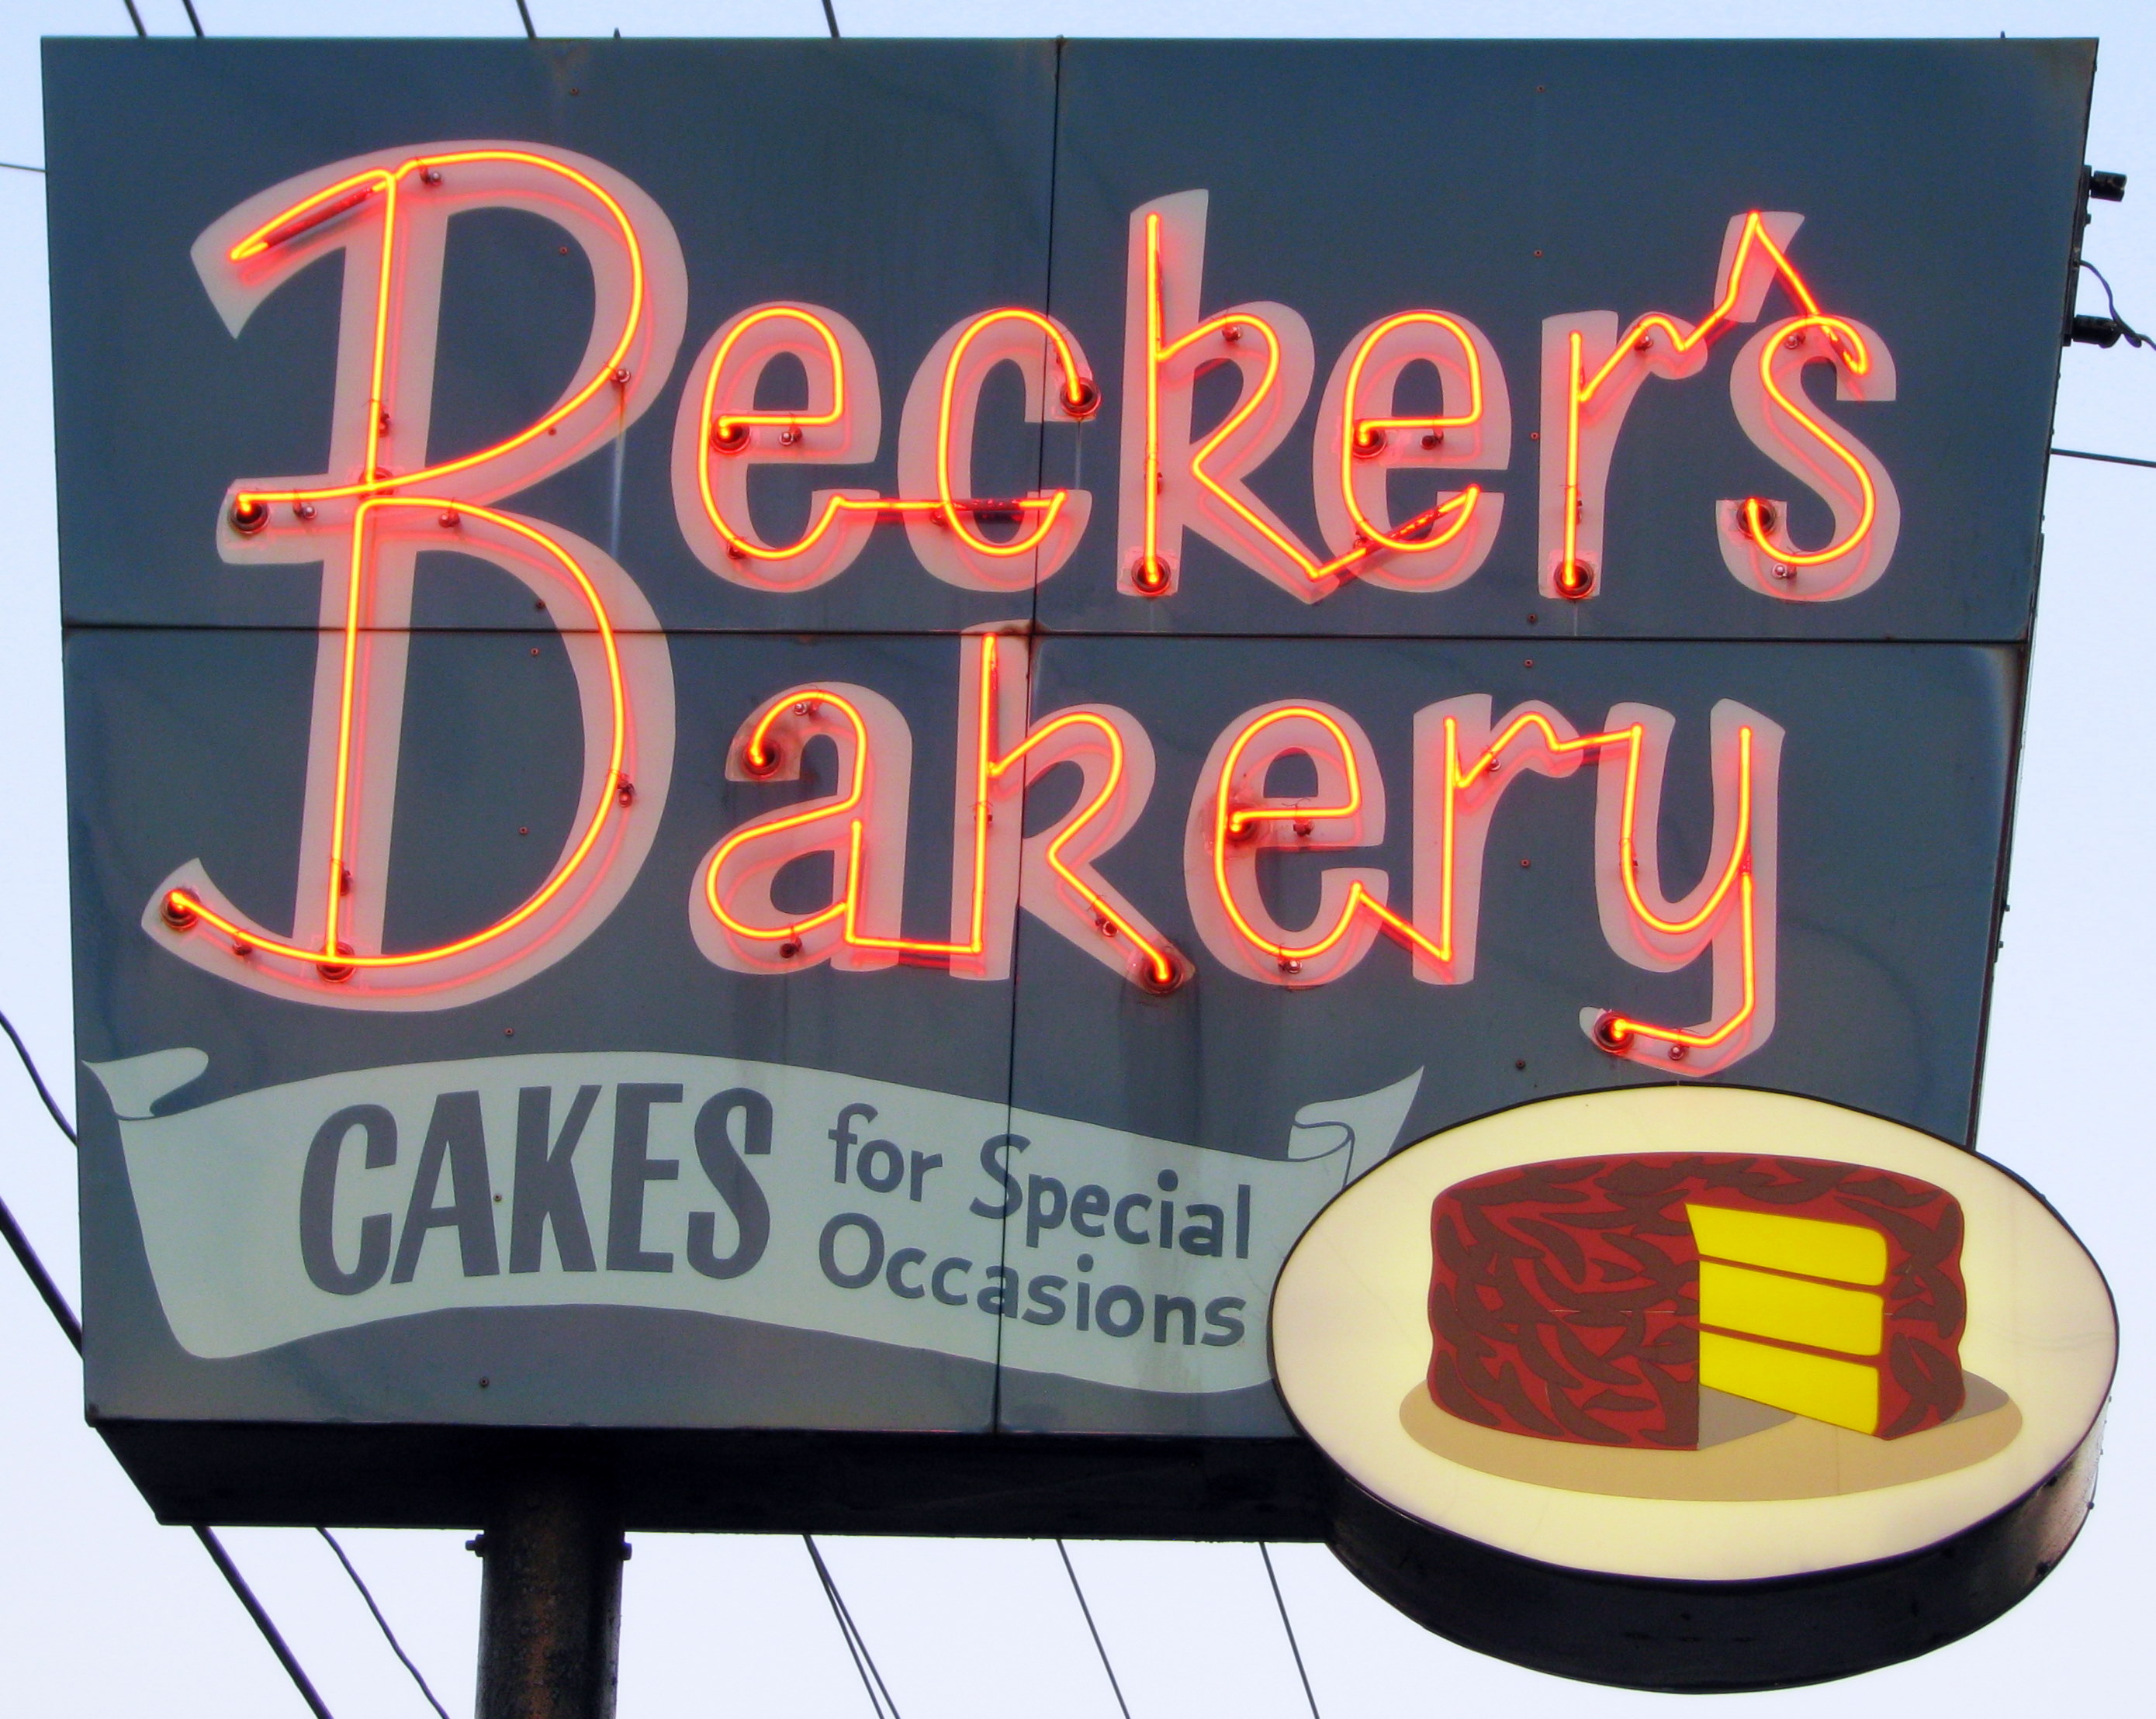 Becker's Bakery - 2600 12th Avenue South, Nashville, Tennessee - March 21, 2008